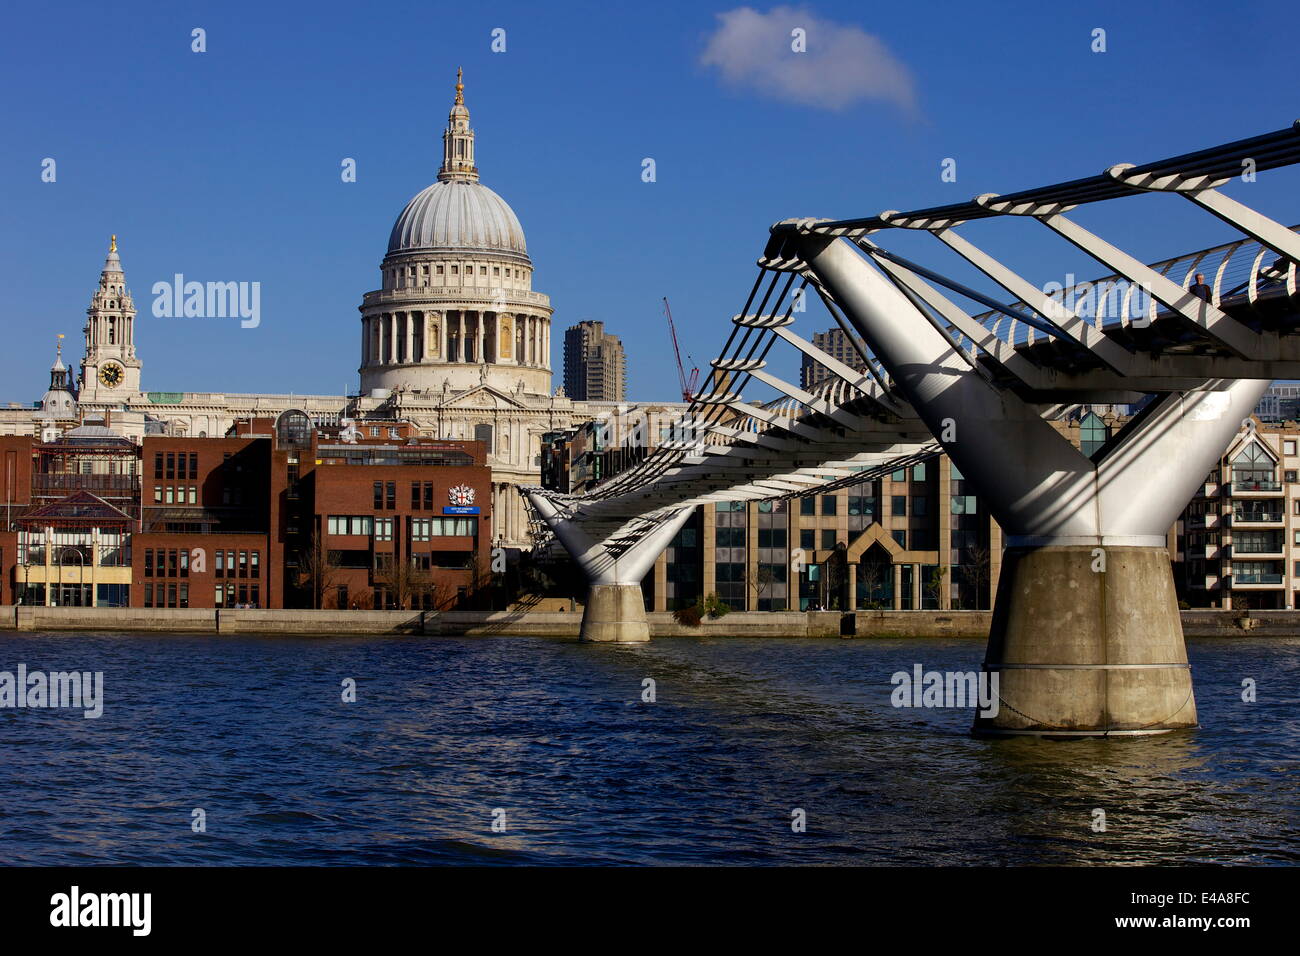 St. Pauls Cathedral, Millennium Bridge and River Thames viewed from South Bank, London, England, United Kingdom, Europe Stock Photo